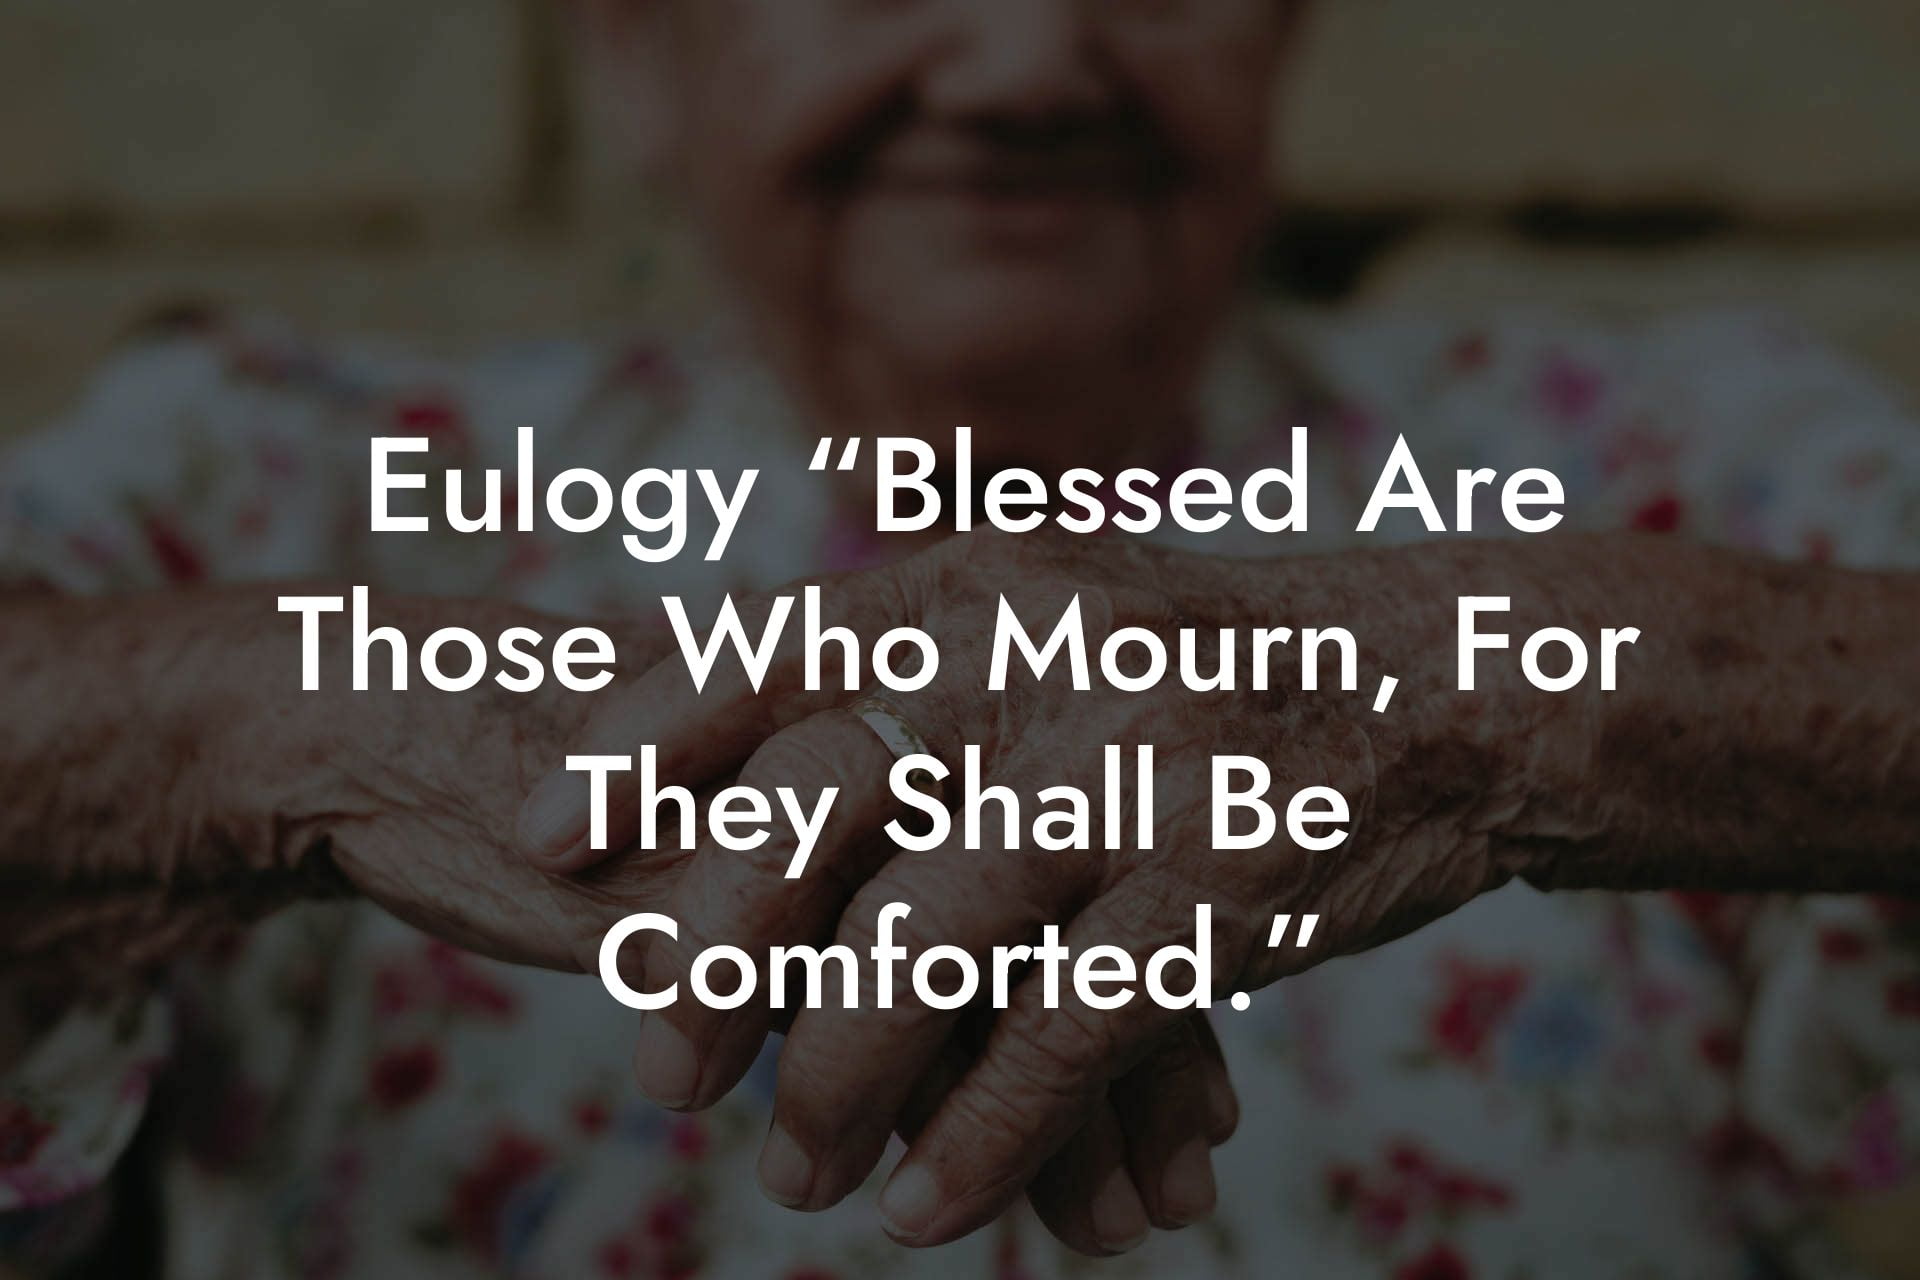 Eulogy “Blessed Are Those Who Mourn, For They Shall Be Comforted.”